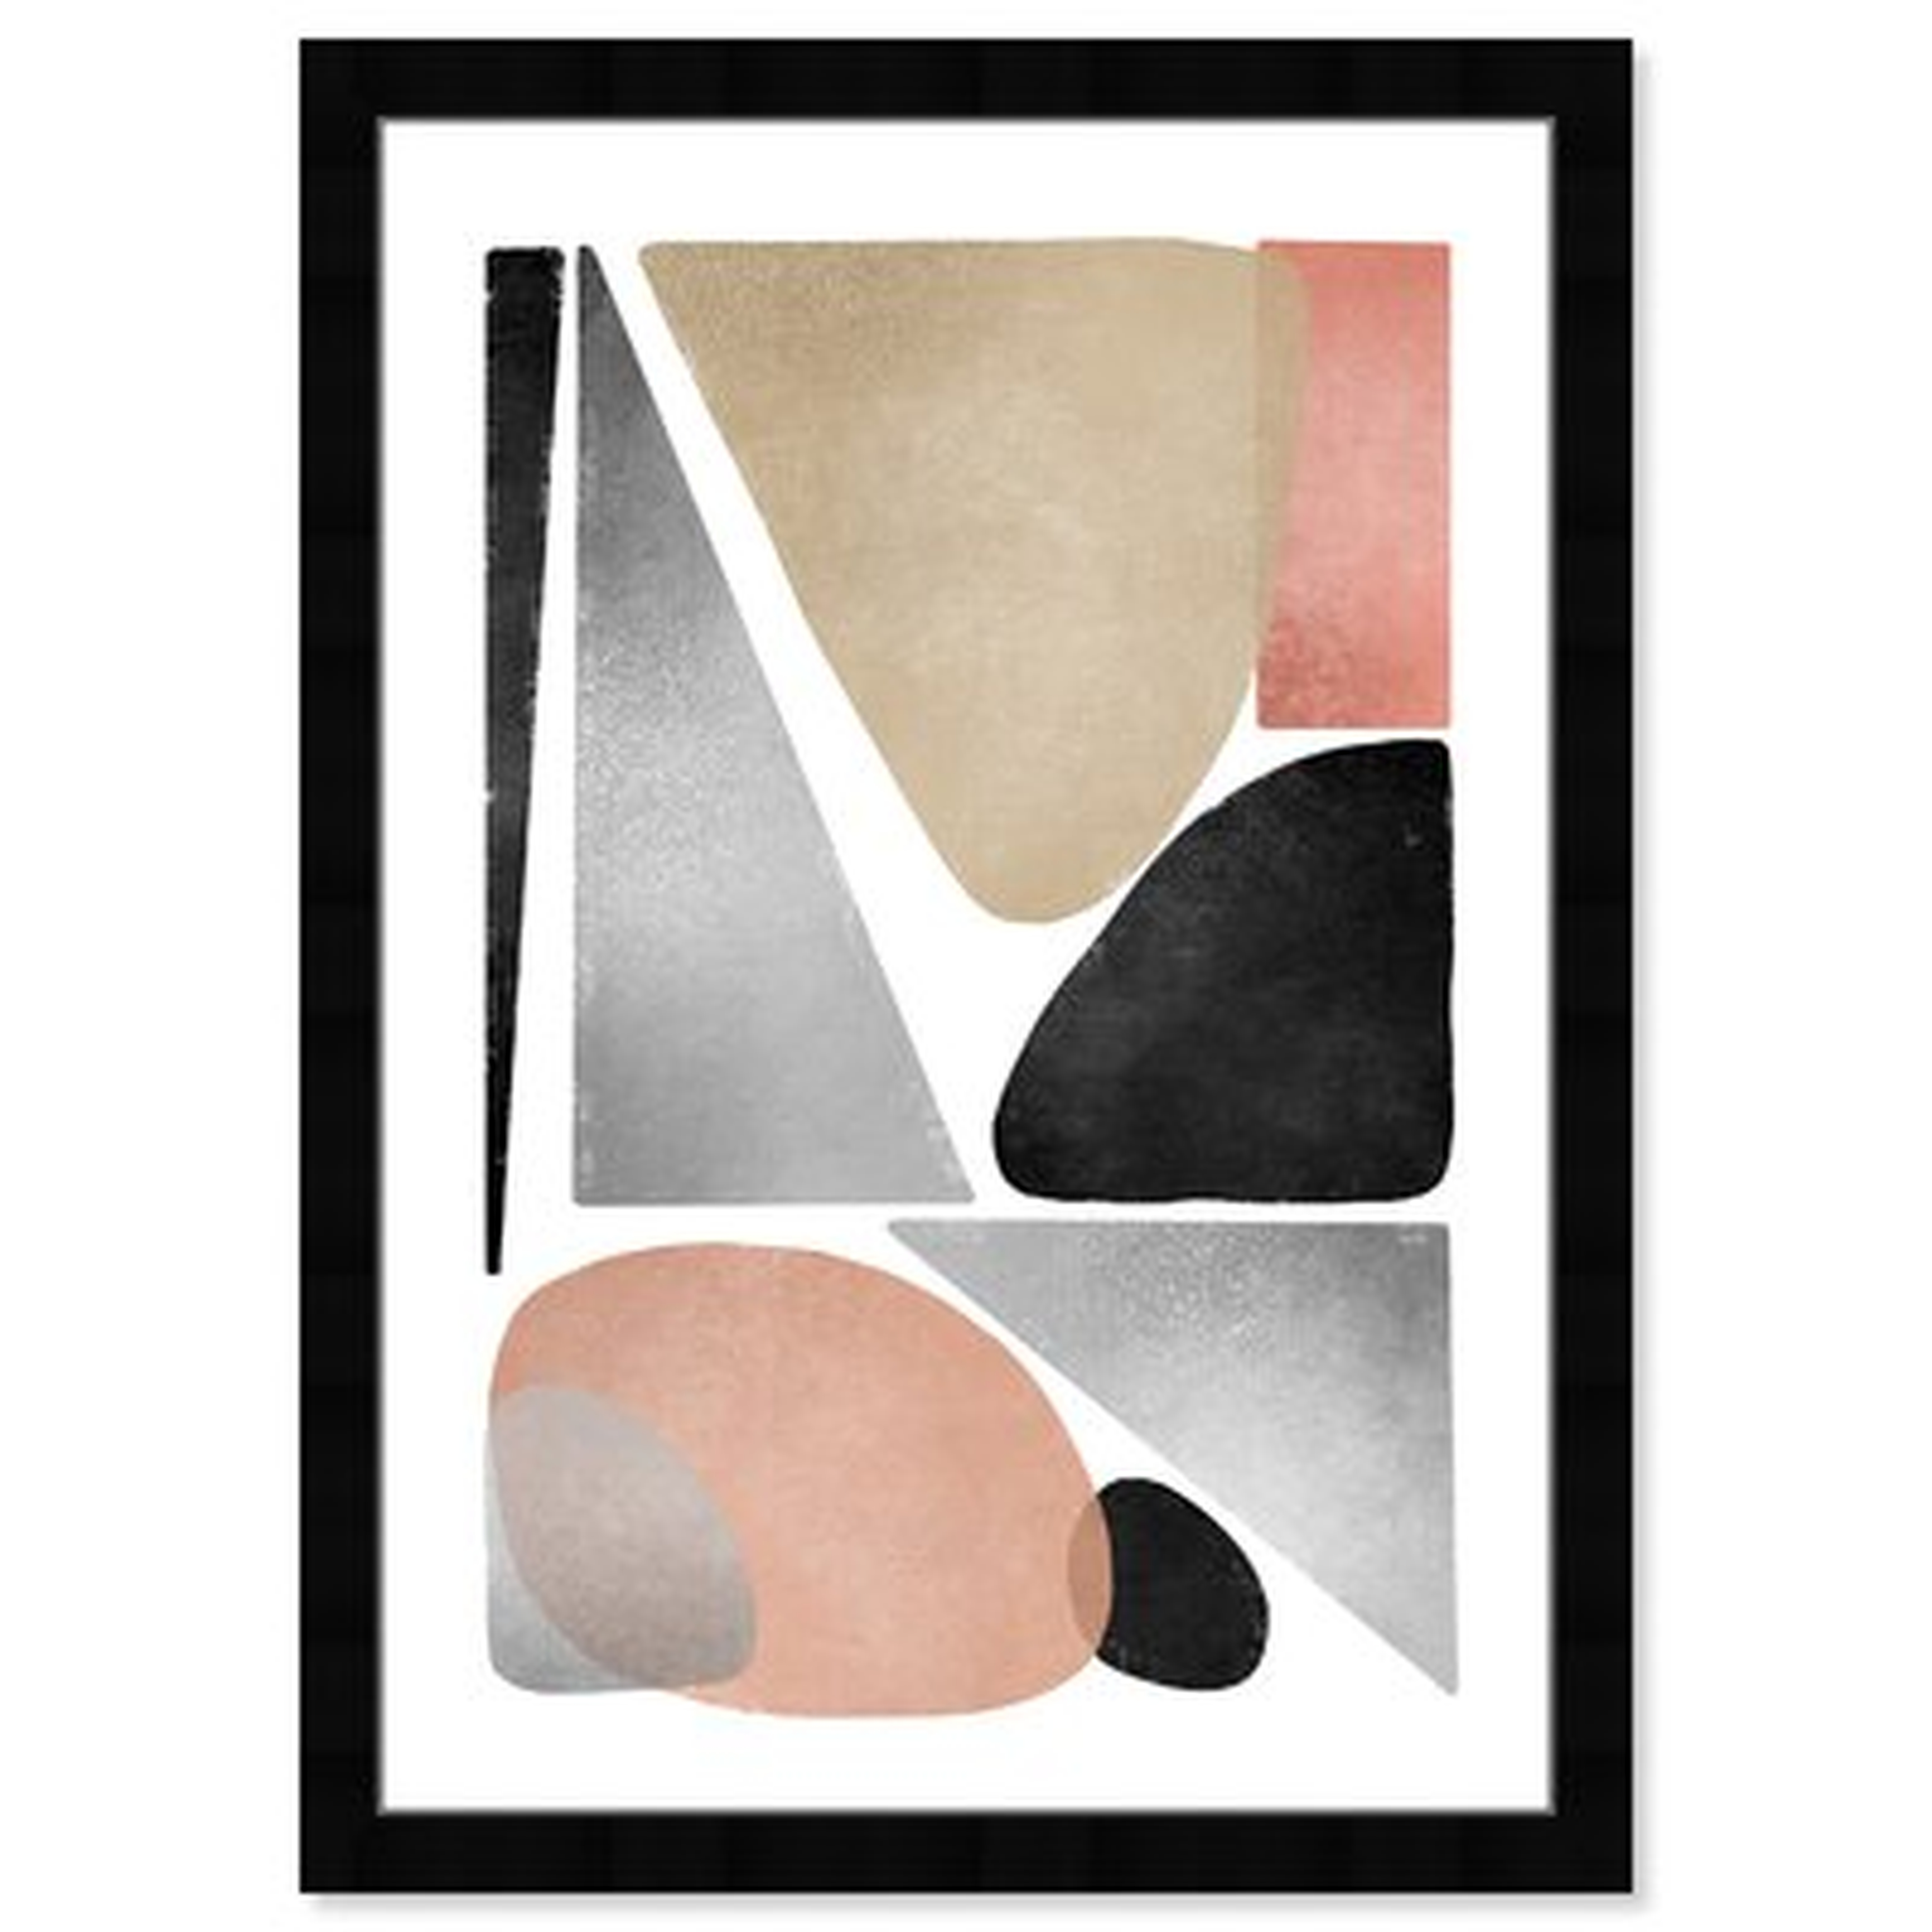 'Abstract The Patio Earthtones Shapes' - Picture Frame Graphic Art Print on Paper - Wayfair